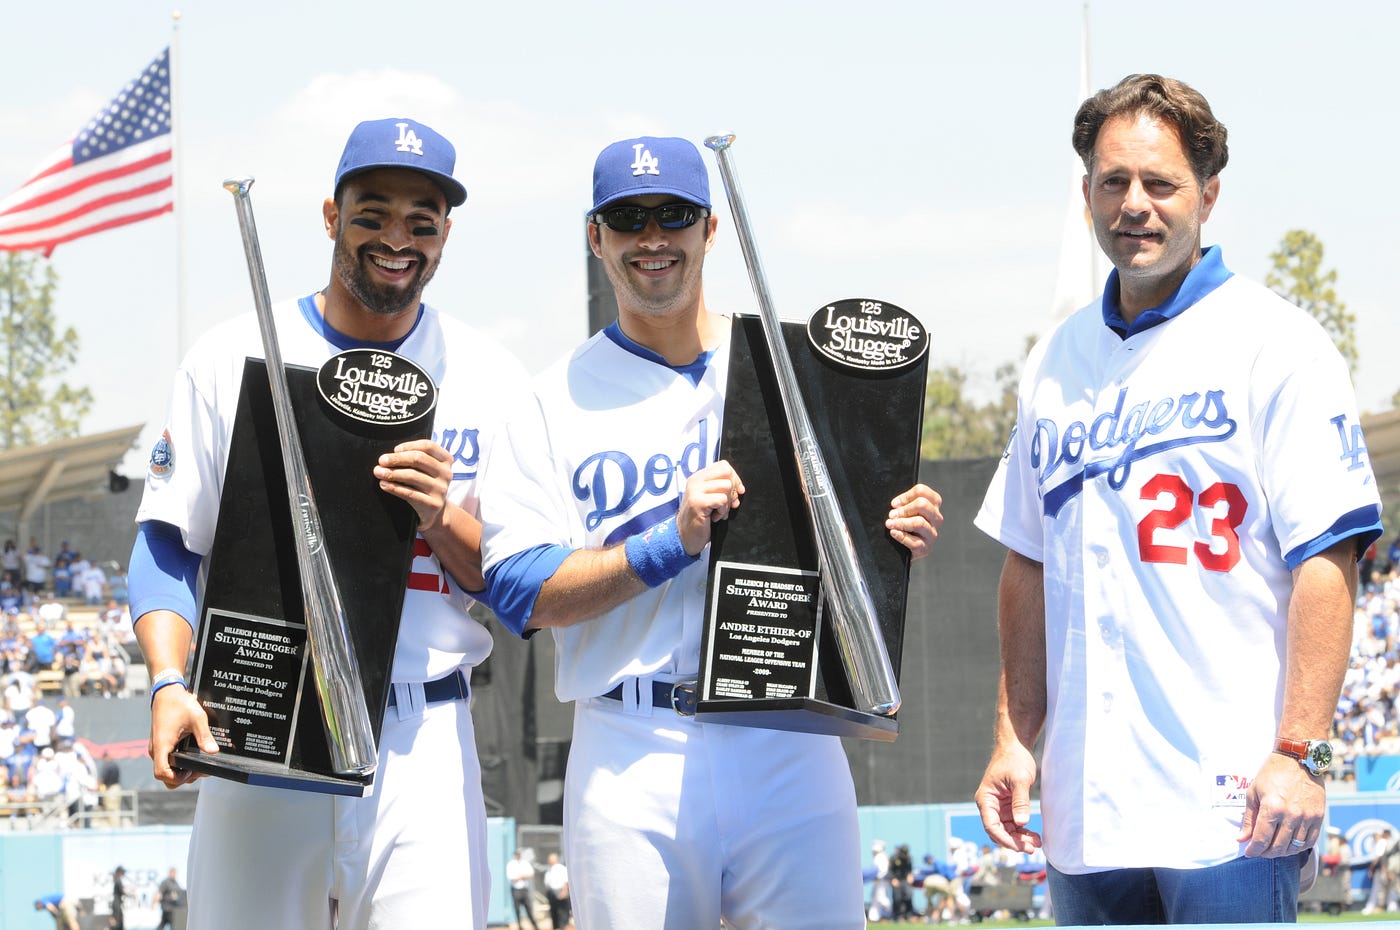 A farewell to Andre Ethier — Mr. Clutch, by Cary Osborne